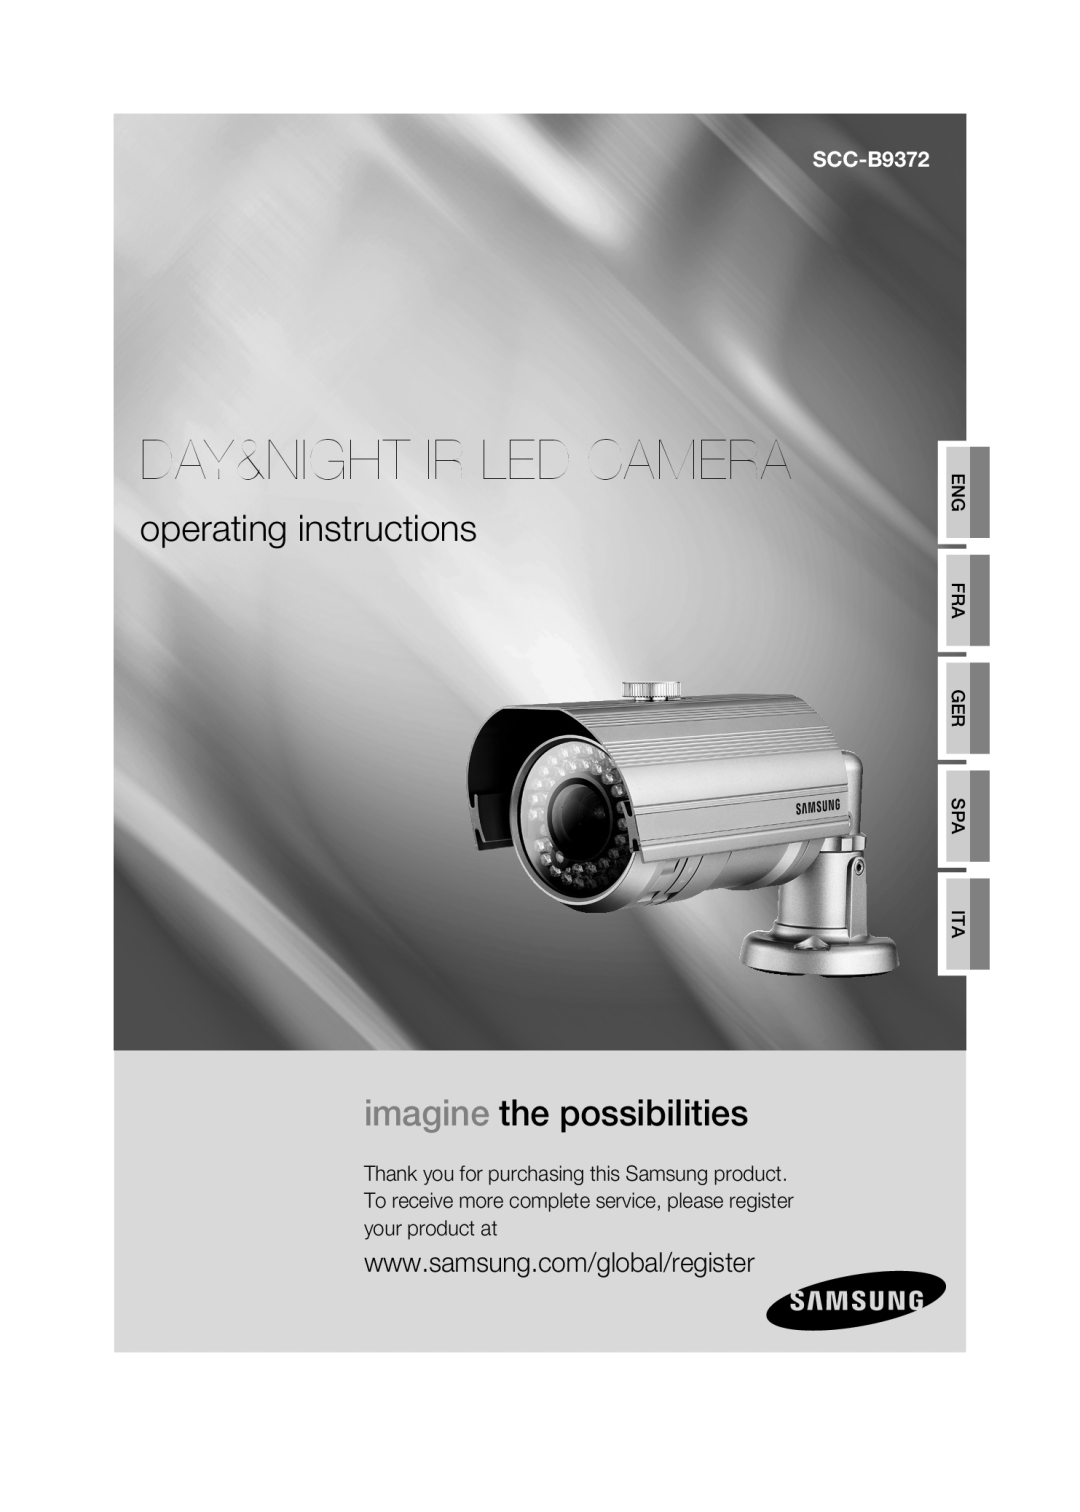 Samsung SCC-B9372P manual Day&Night Ir Led Camera, operating instructions, imagine the possibilities 